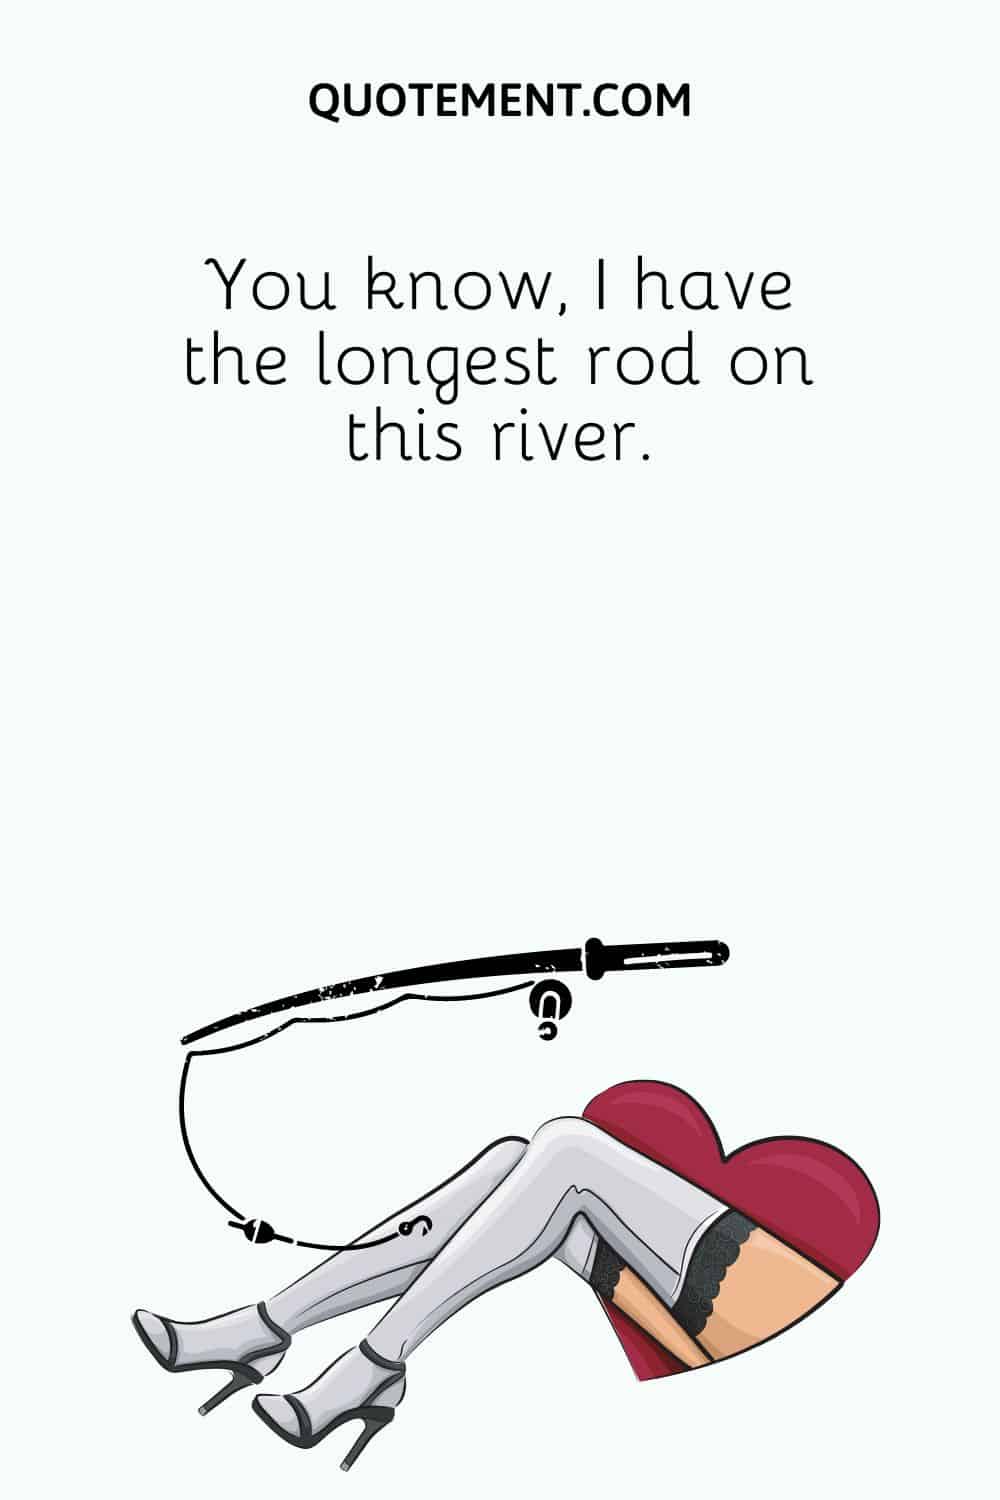 You know, I have the longest rod on this river